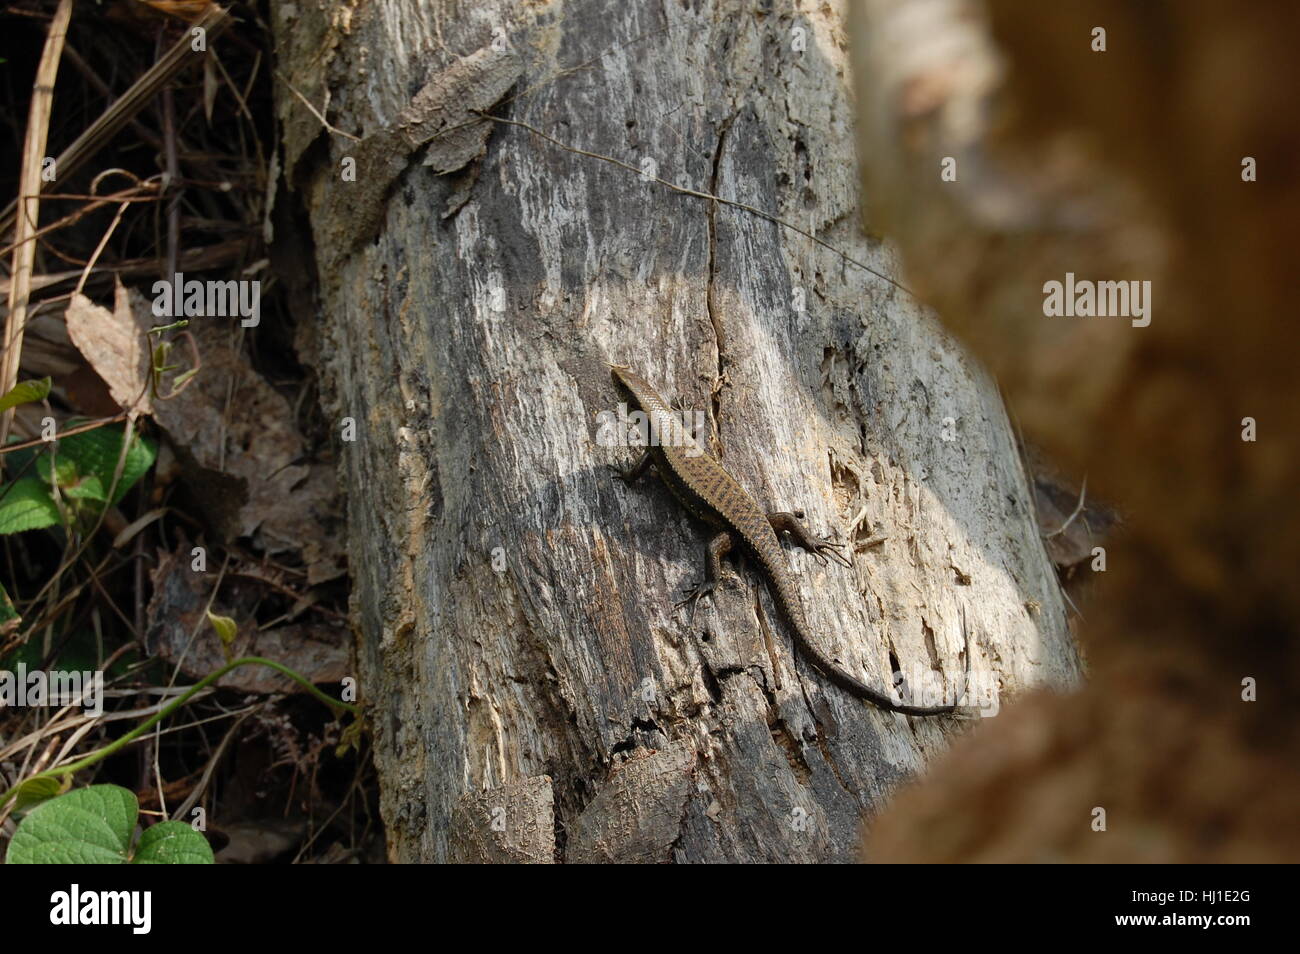 This is a large golden skink found on a fallen tree bark in Malaysia. Stock Photo